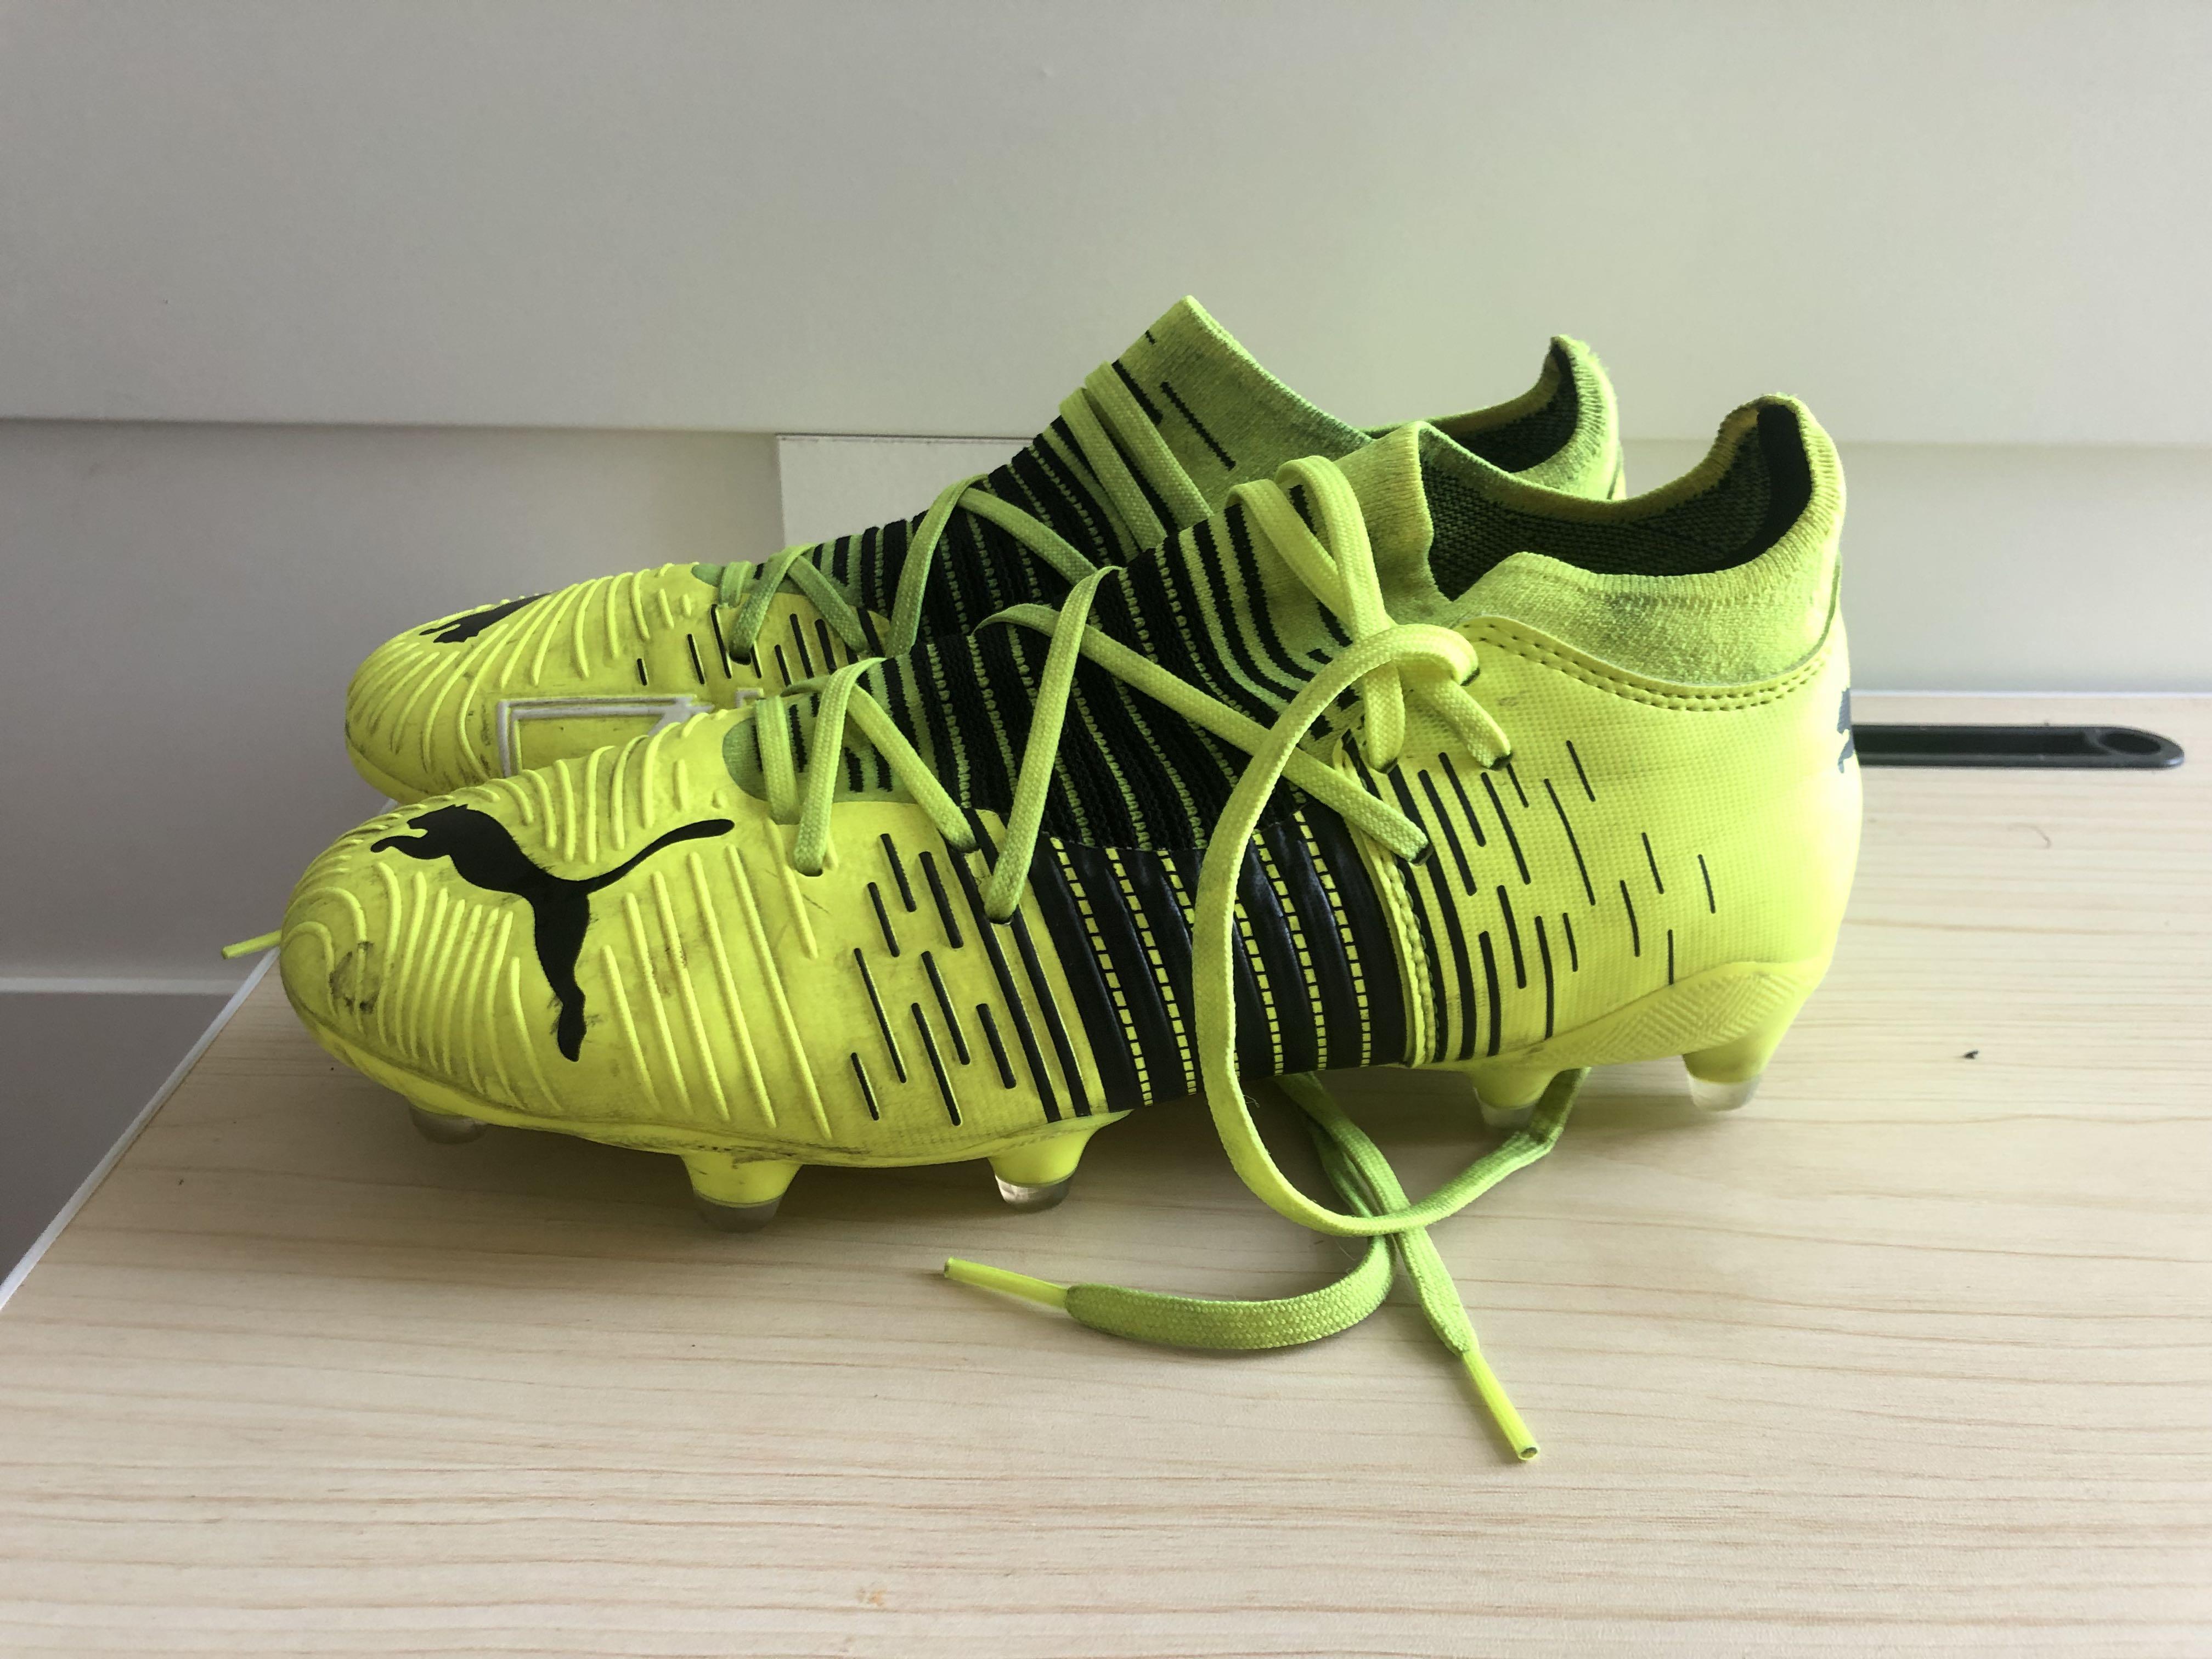 Puma Future Z 3 1 Soccer Boots Us 7 Sports Equipment Sports Games Racket Ball Sports On Carousell